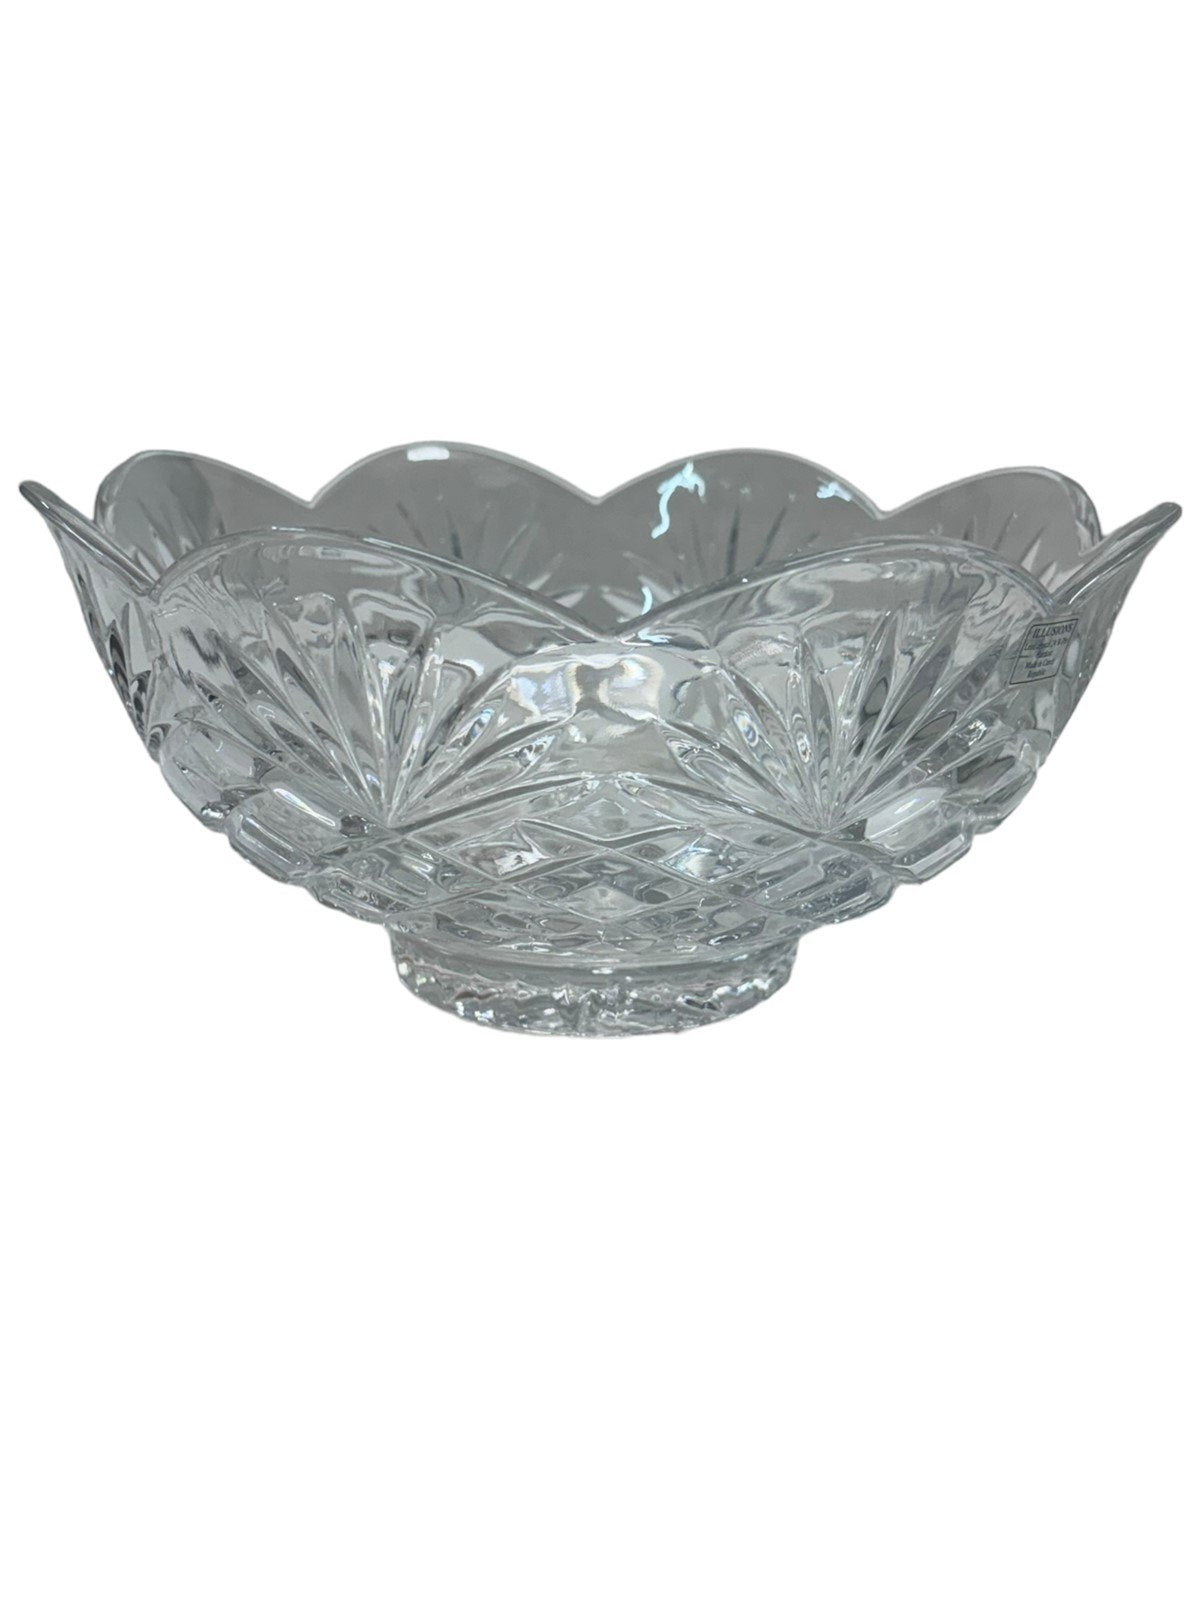 Crystal Bowl 24% Full Lead Handcut Footed Scallop Bowl With original Box Vintage